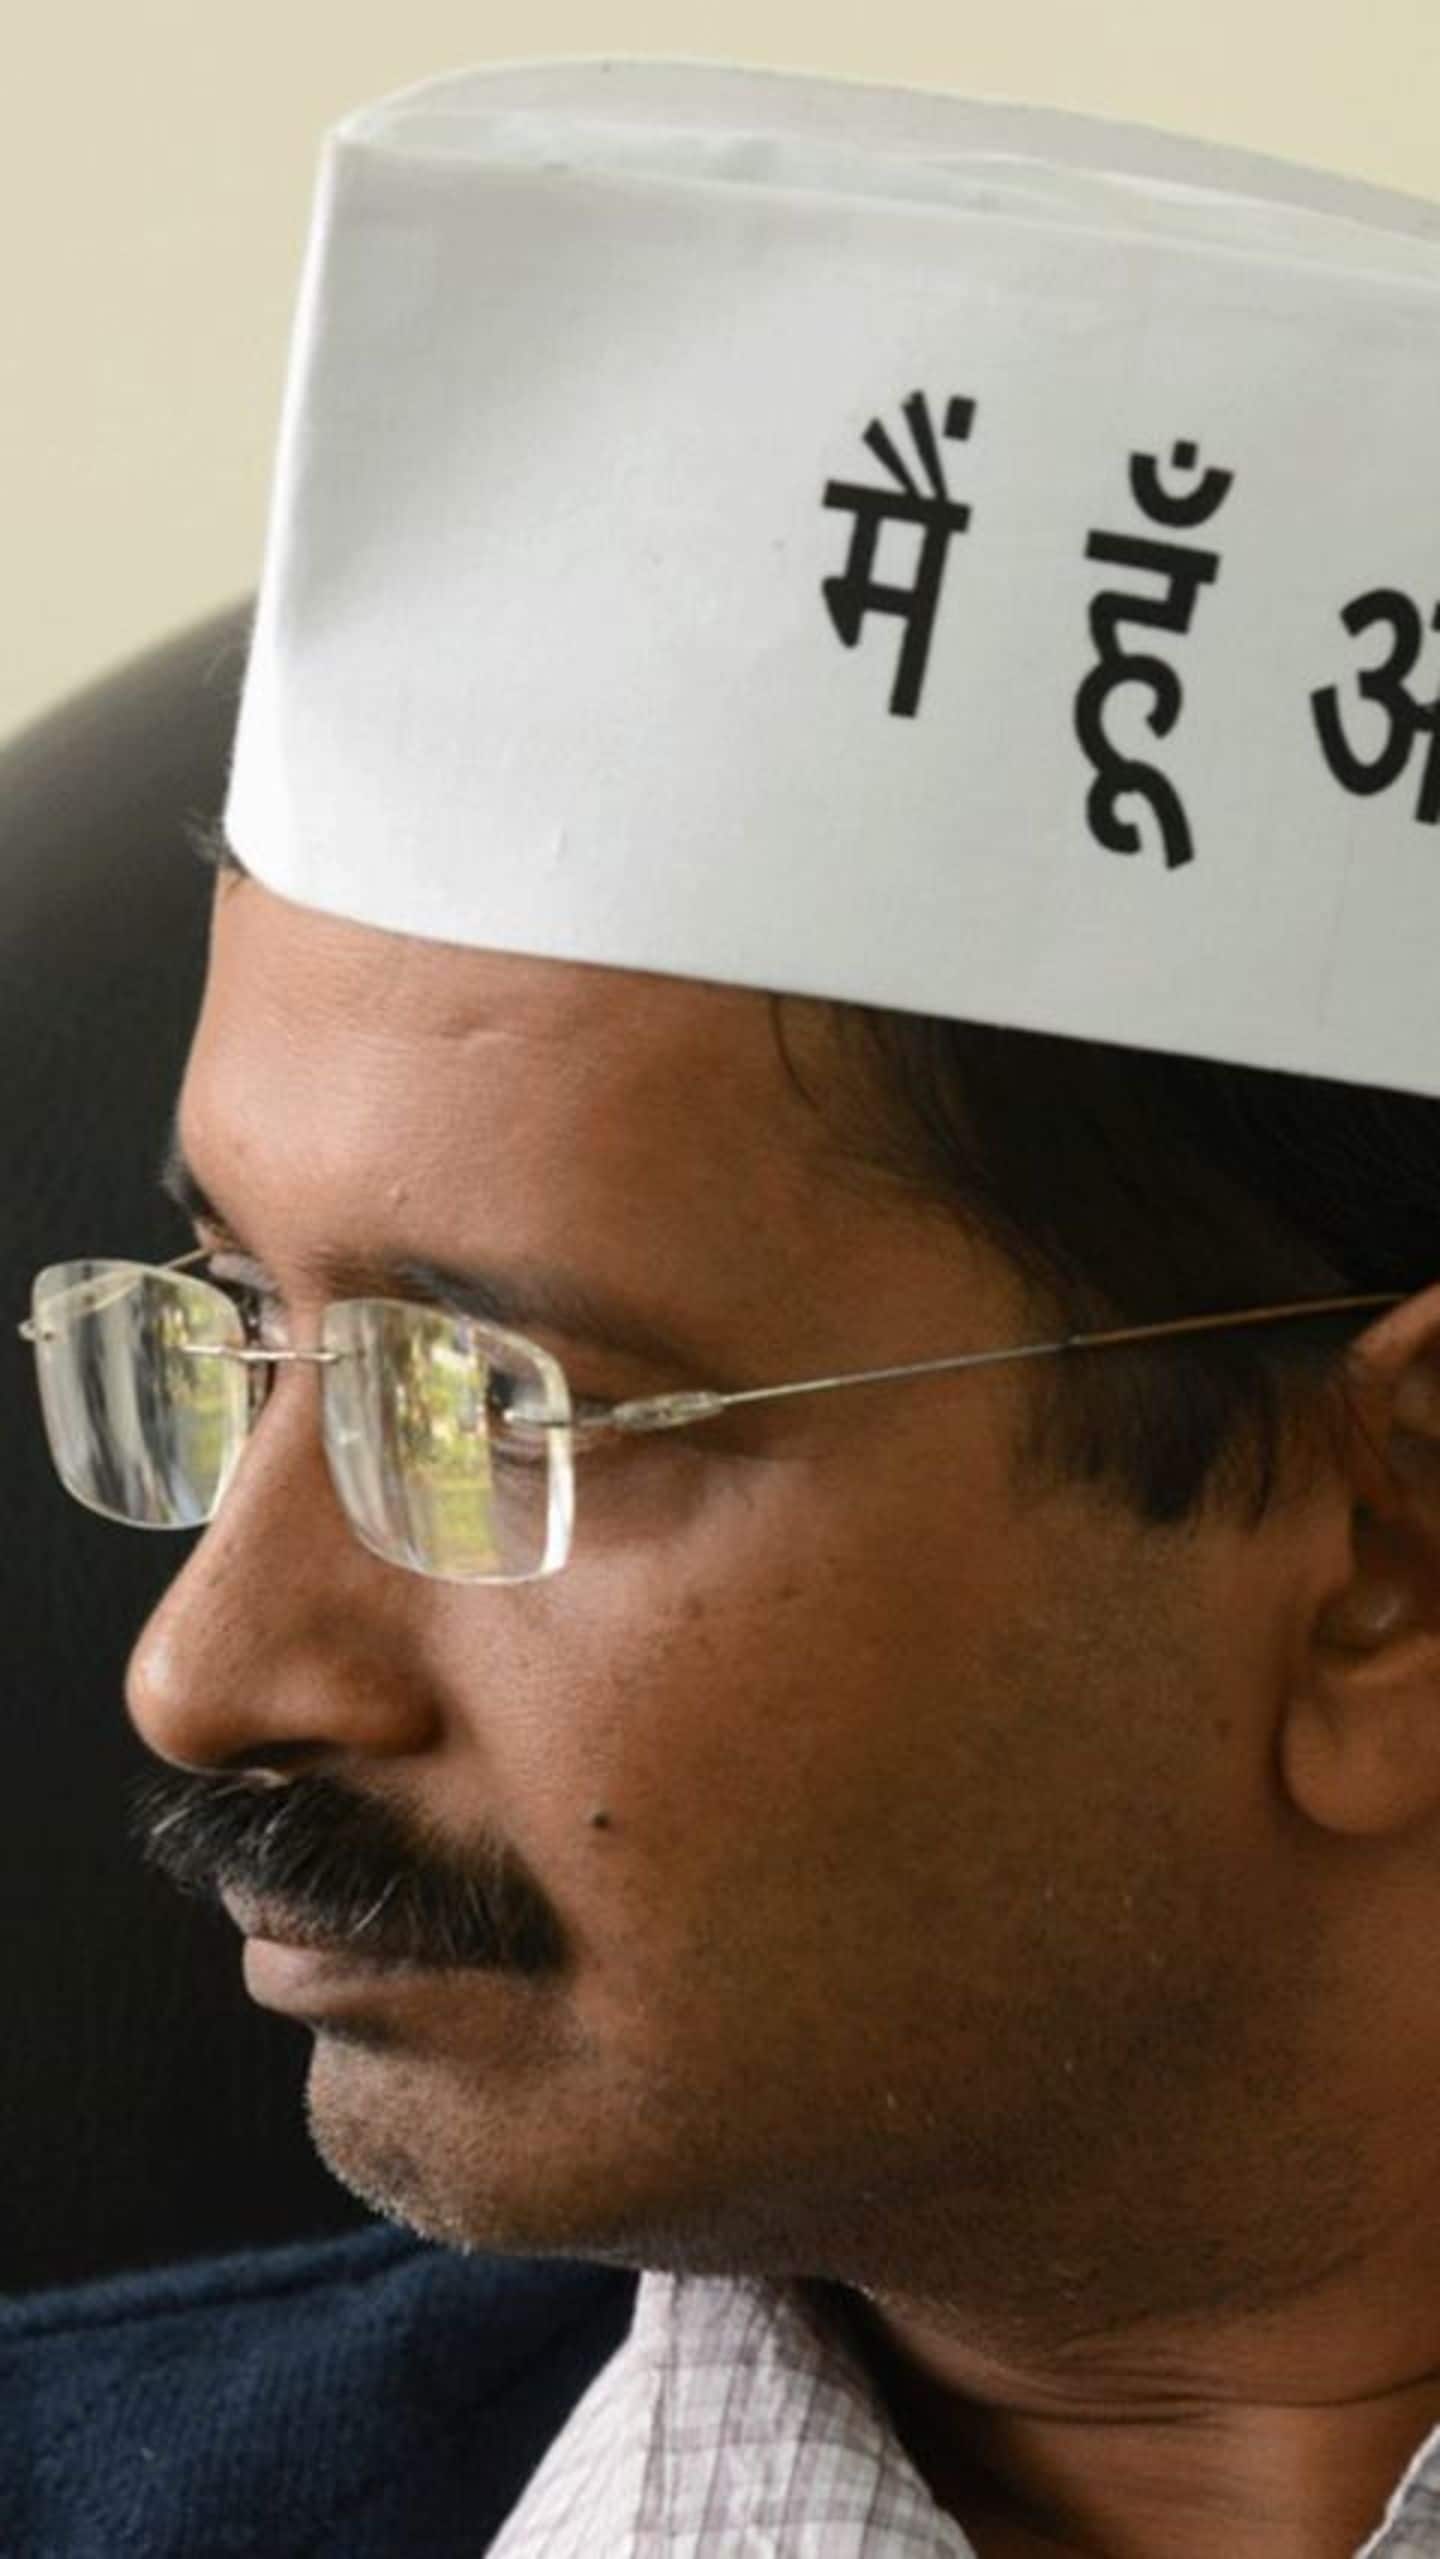  Kejriwal asked to wait for meeting with President